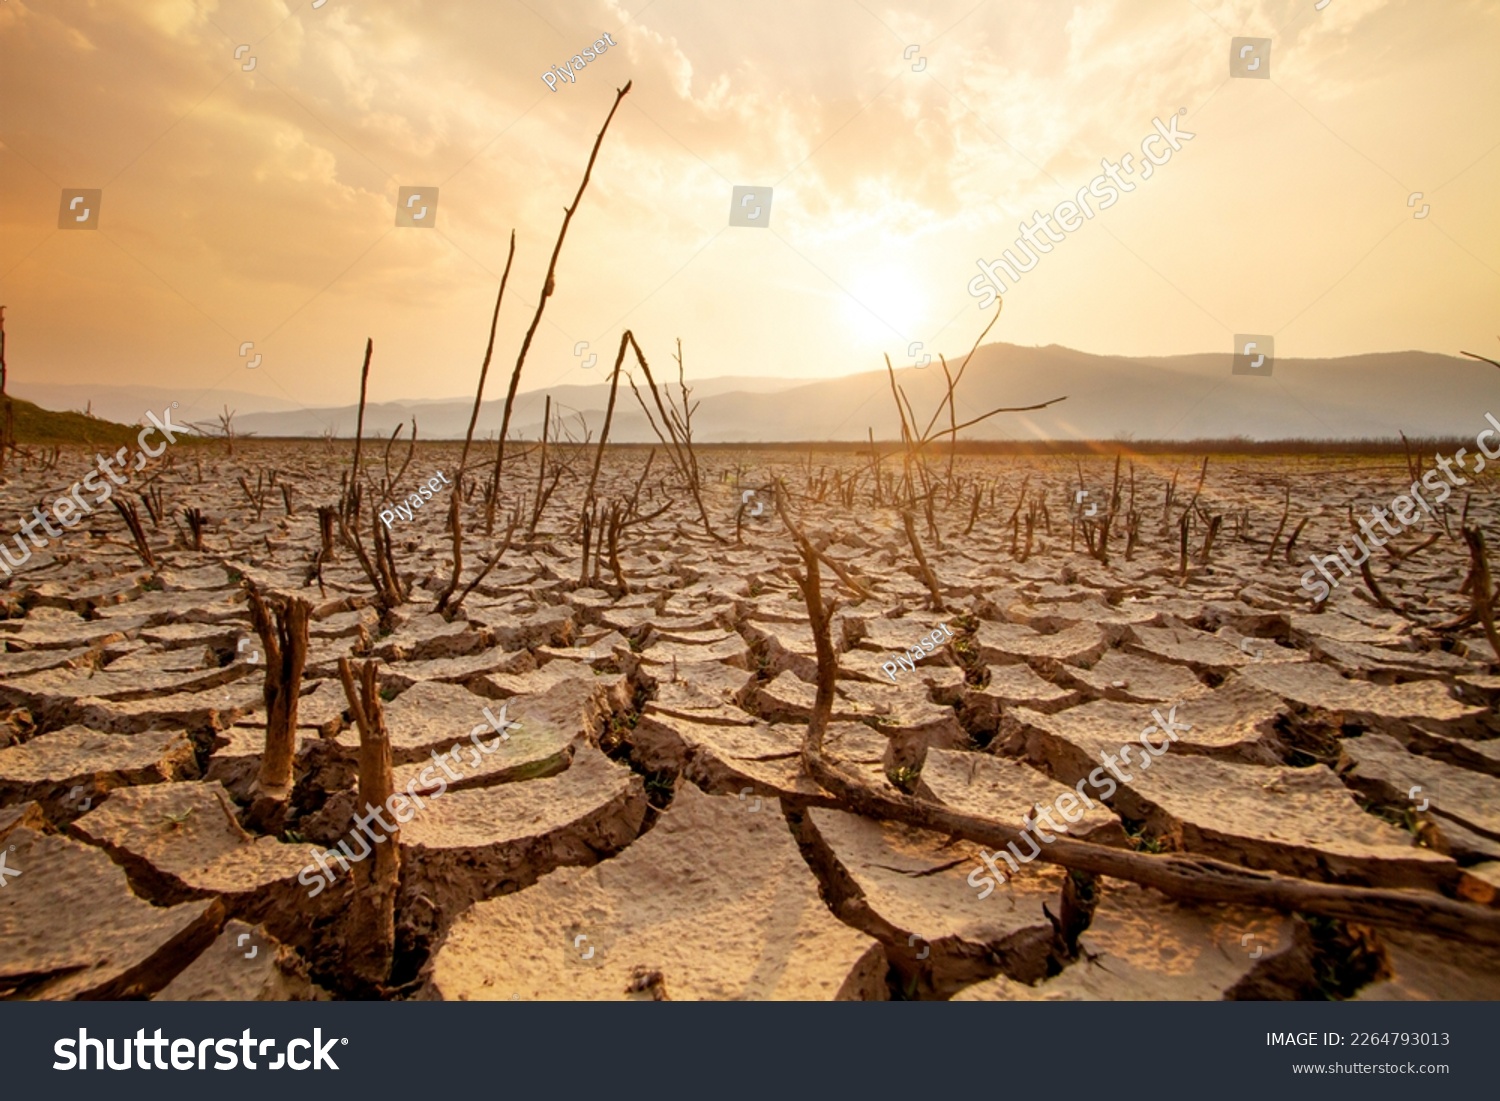 Dead trees on dry cracked earth metaphor Drought, Water crisis and World Climate change. #2264793013